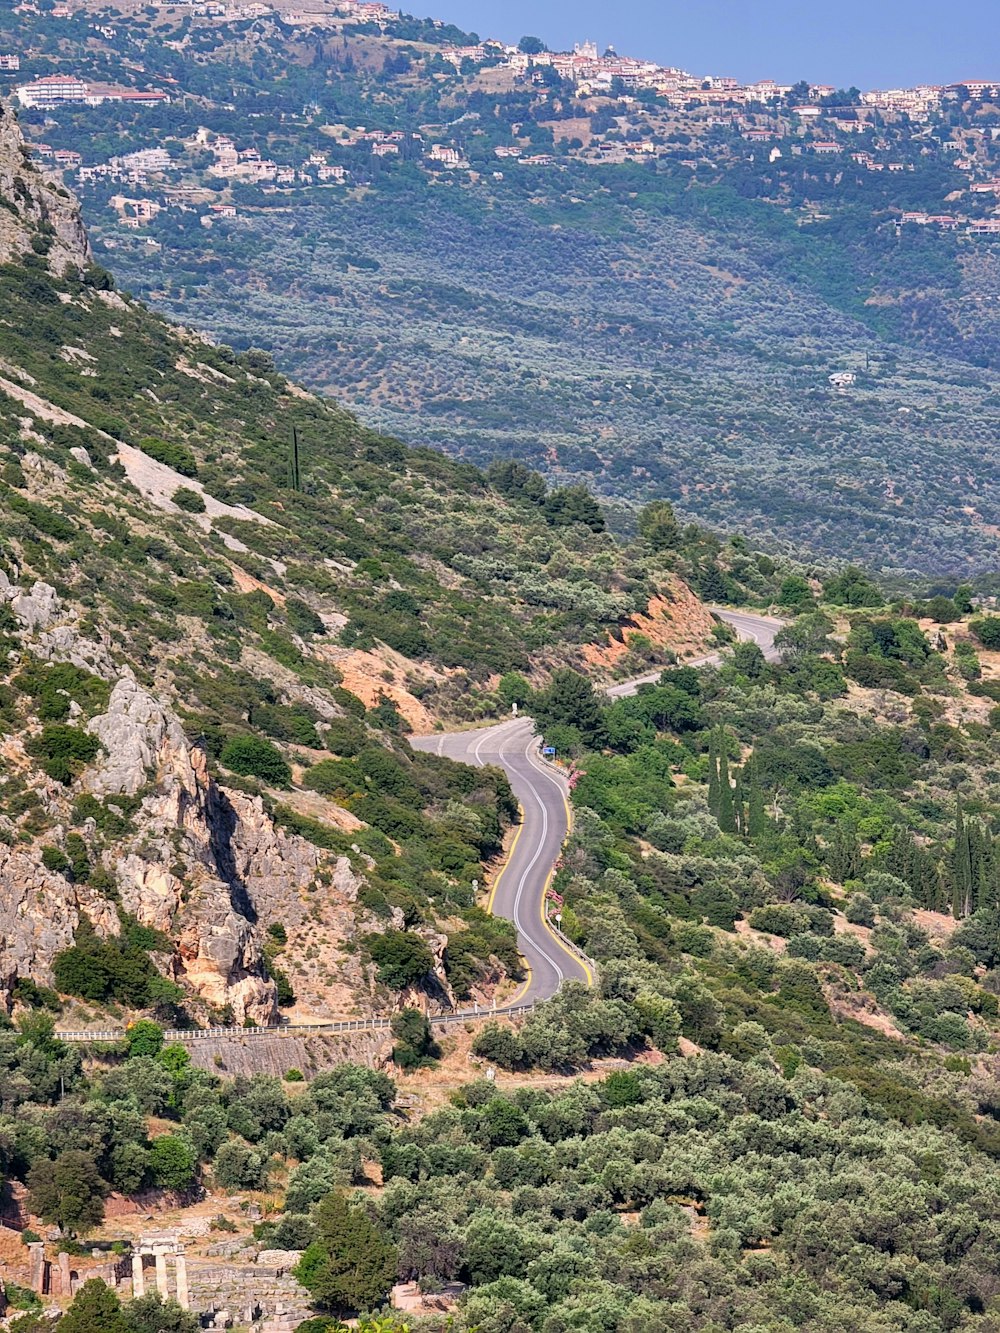 a winding road in the middle of a mountainous area